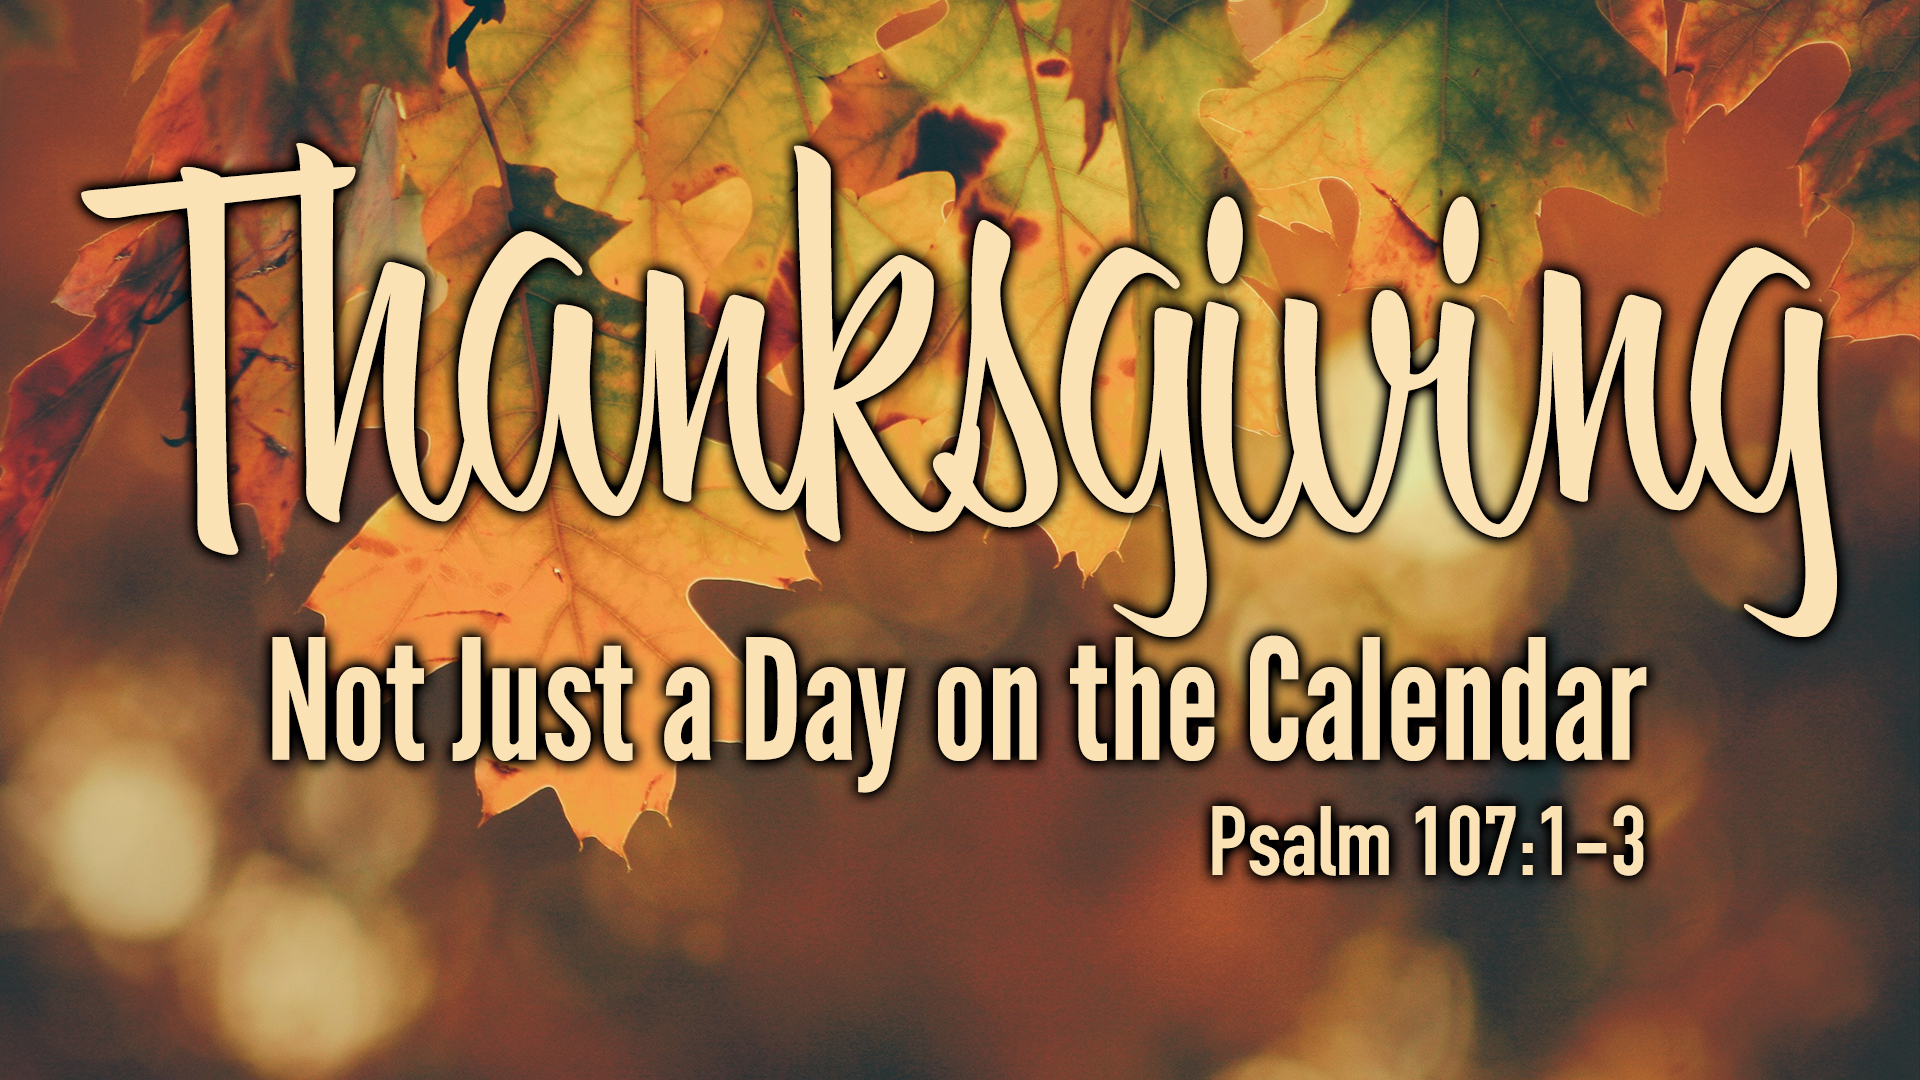 Thanksgiving: Not Just a Day on the Calendar